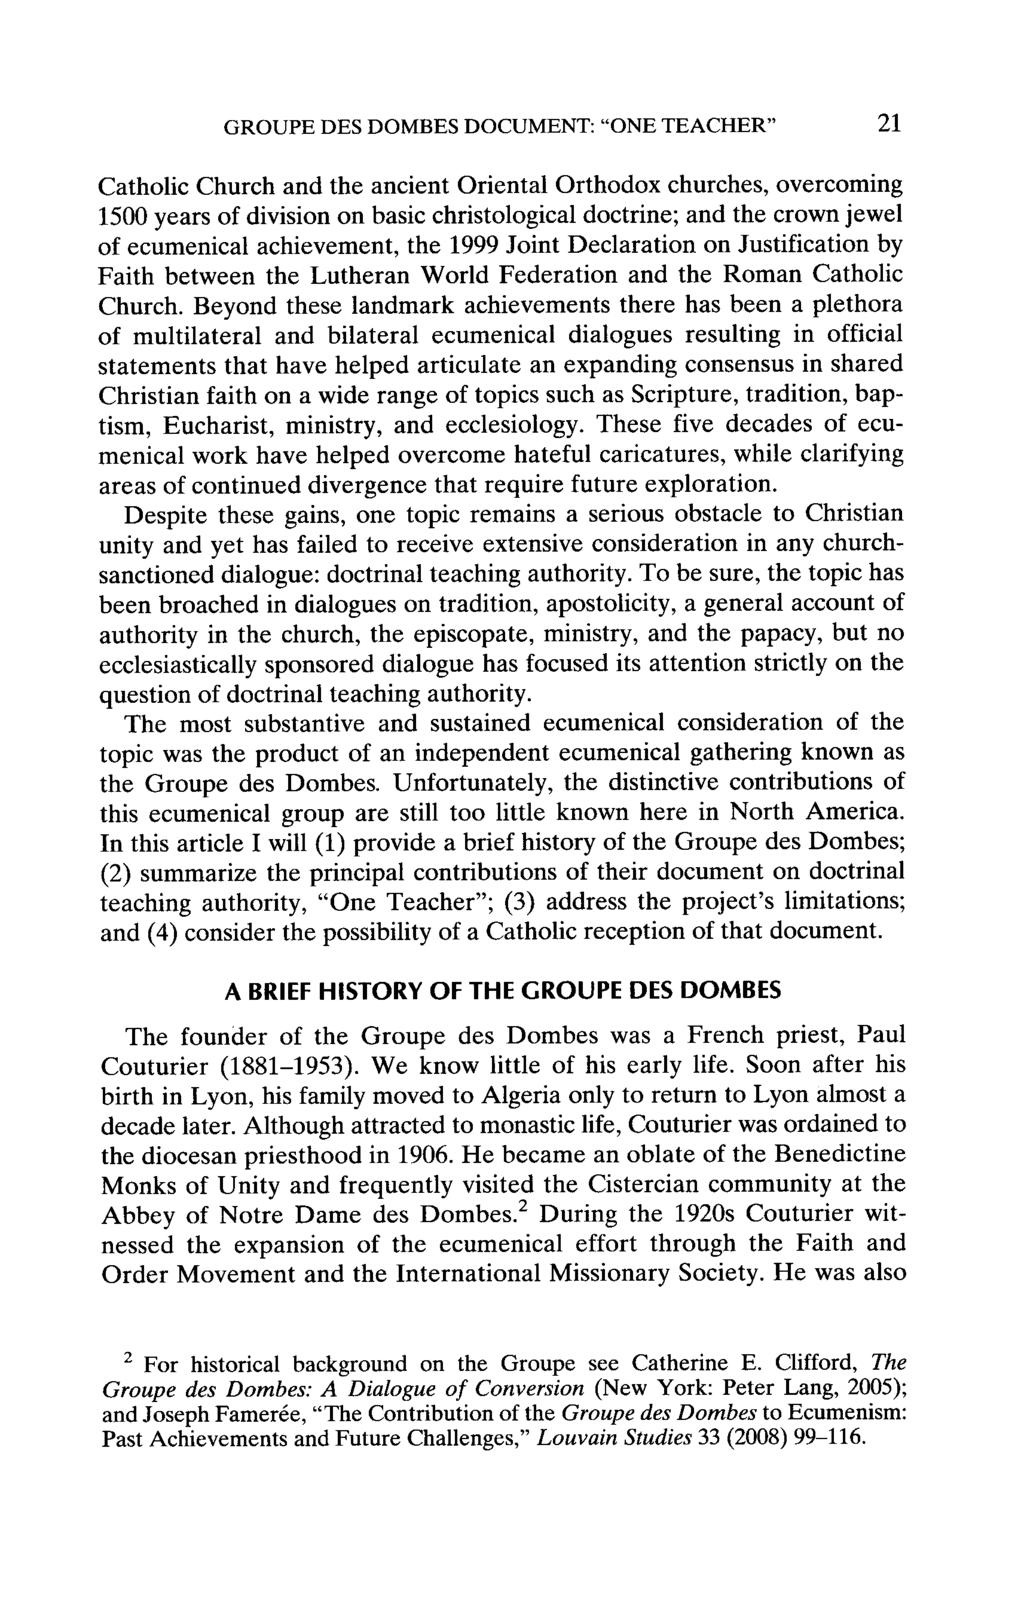 GROUPE DES DOMBES DOCUMENT: ONE TEACHER 21 Catholic Church and the ancient Oriental Orthodox churches, overcoming 1500 years of division on basic christological doctrine; and the crown jewel of